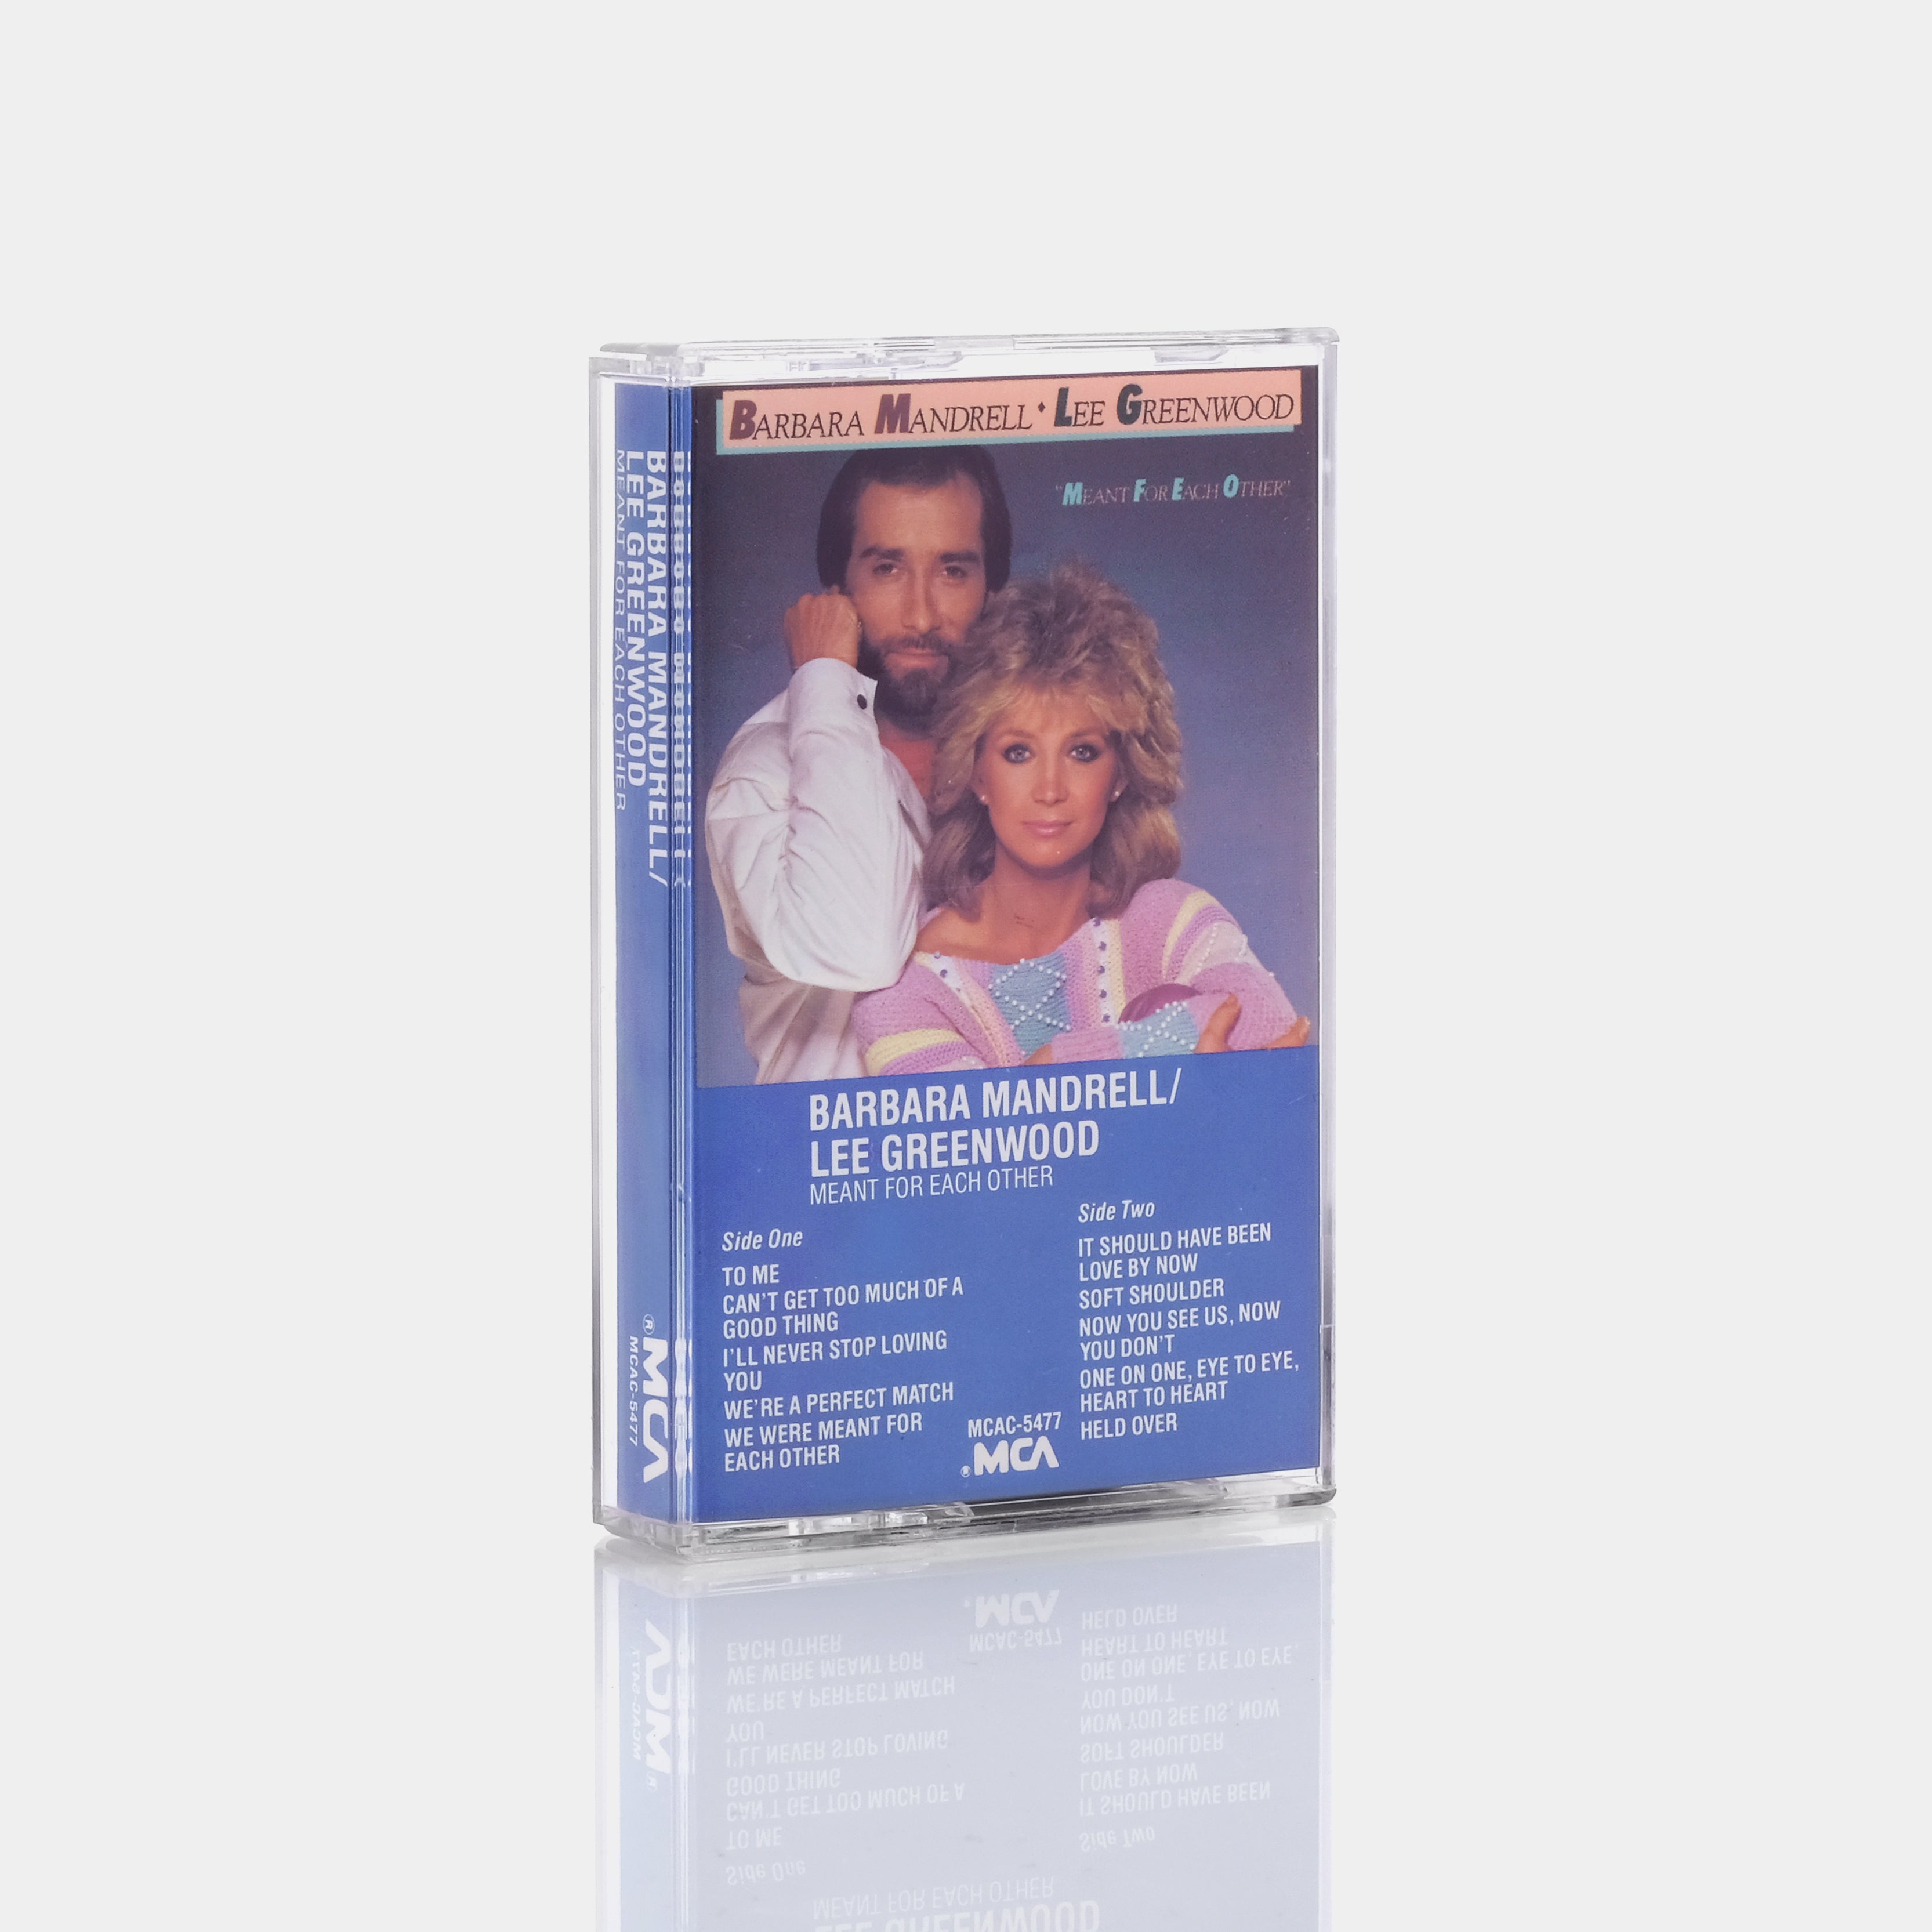 Barbara Mandrell / Lee Greenwood - Meant For Each Other Cassette Tape